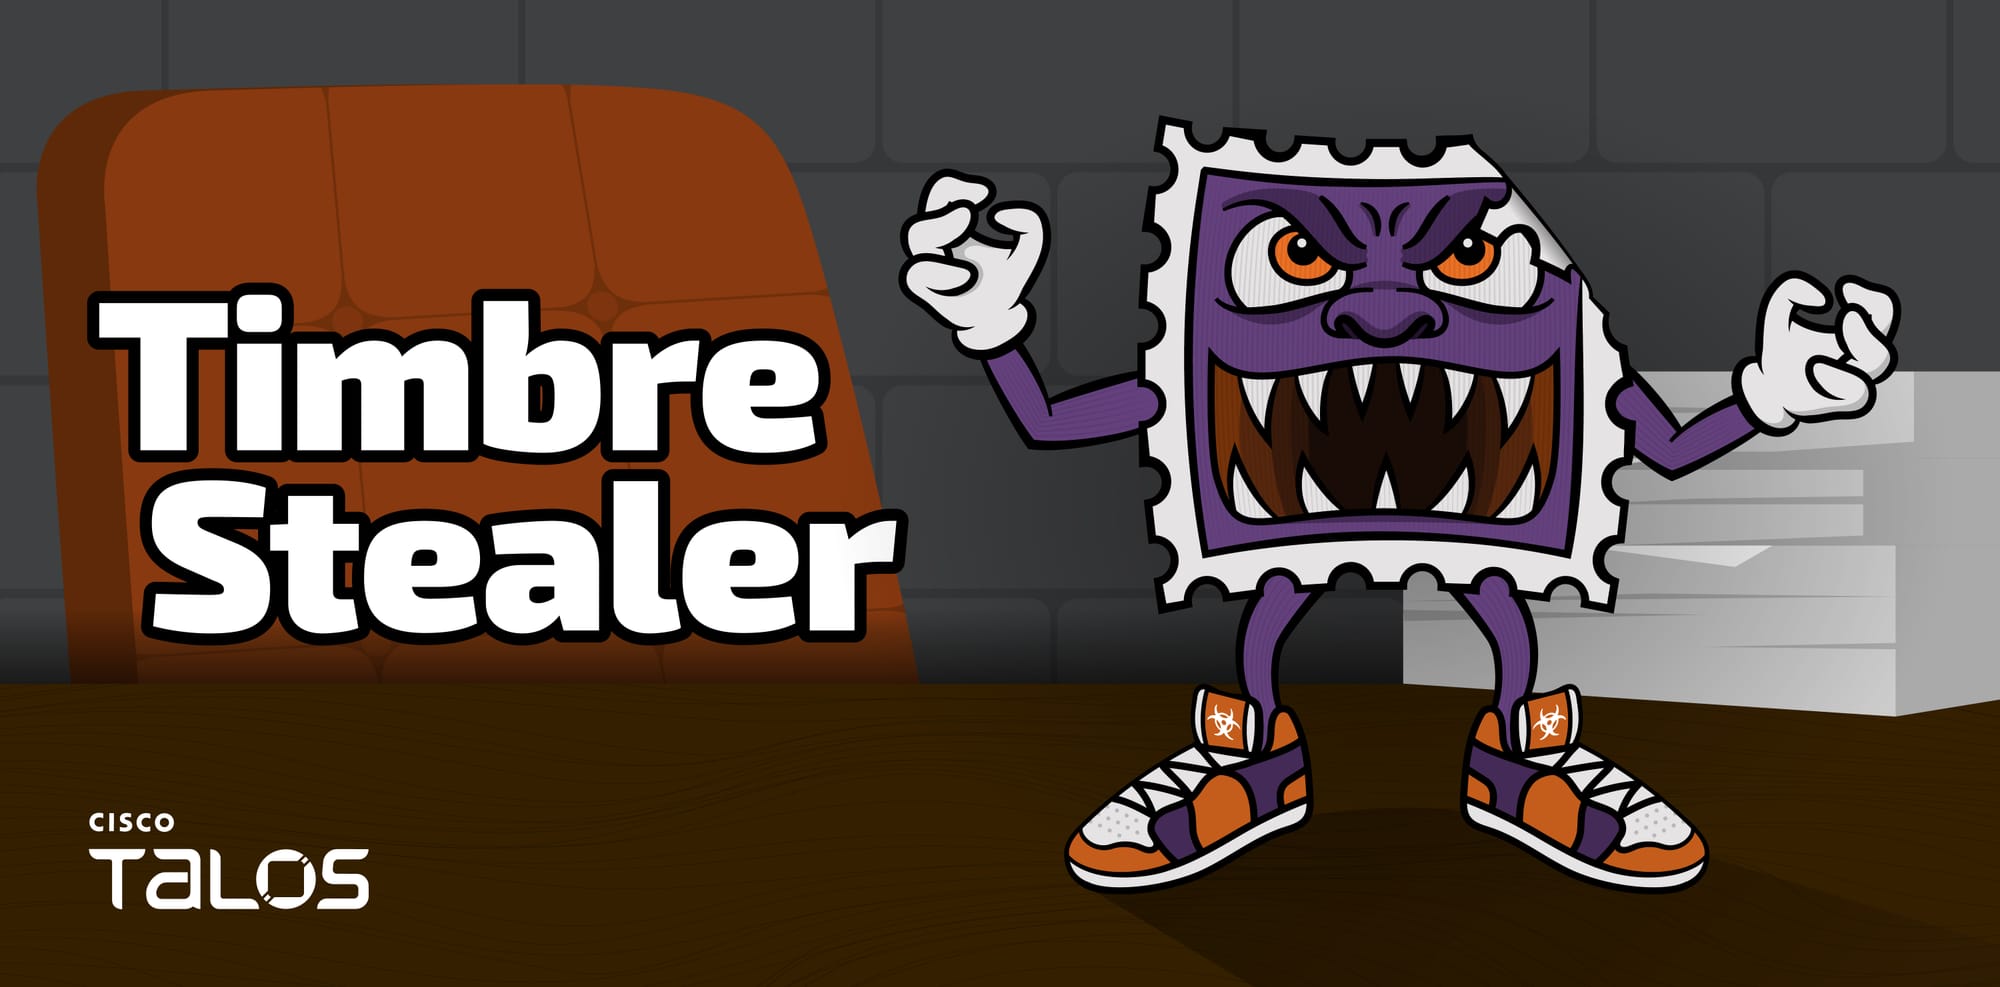 TimbreStealer campaign targets Mexican users with financial lures